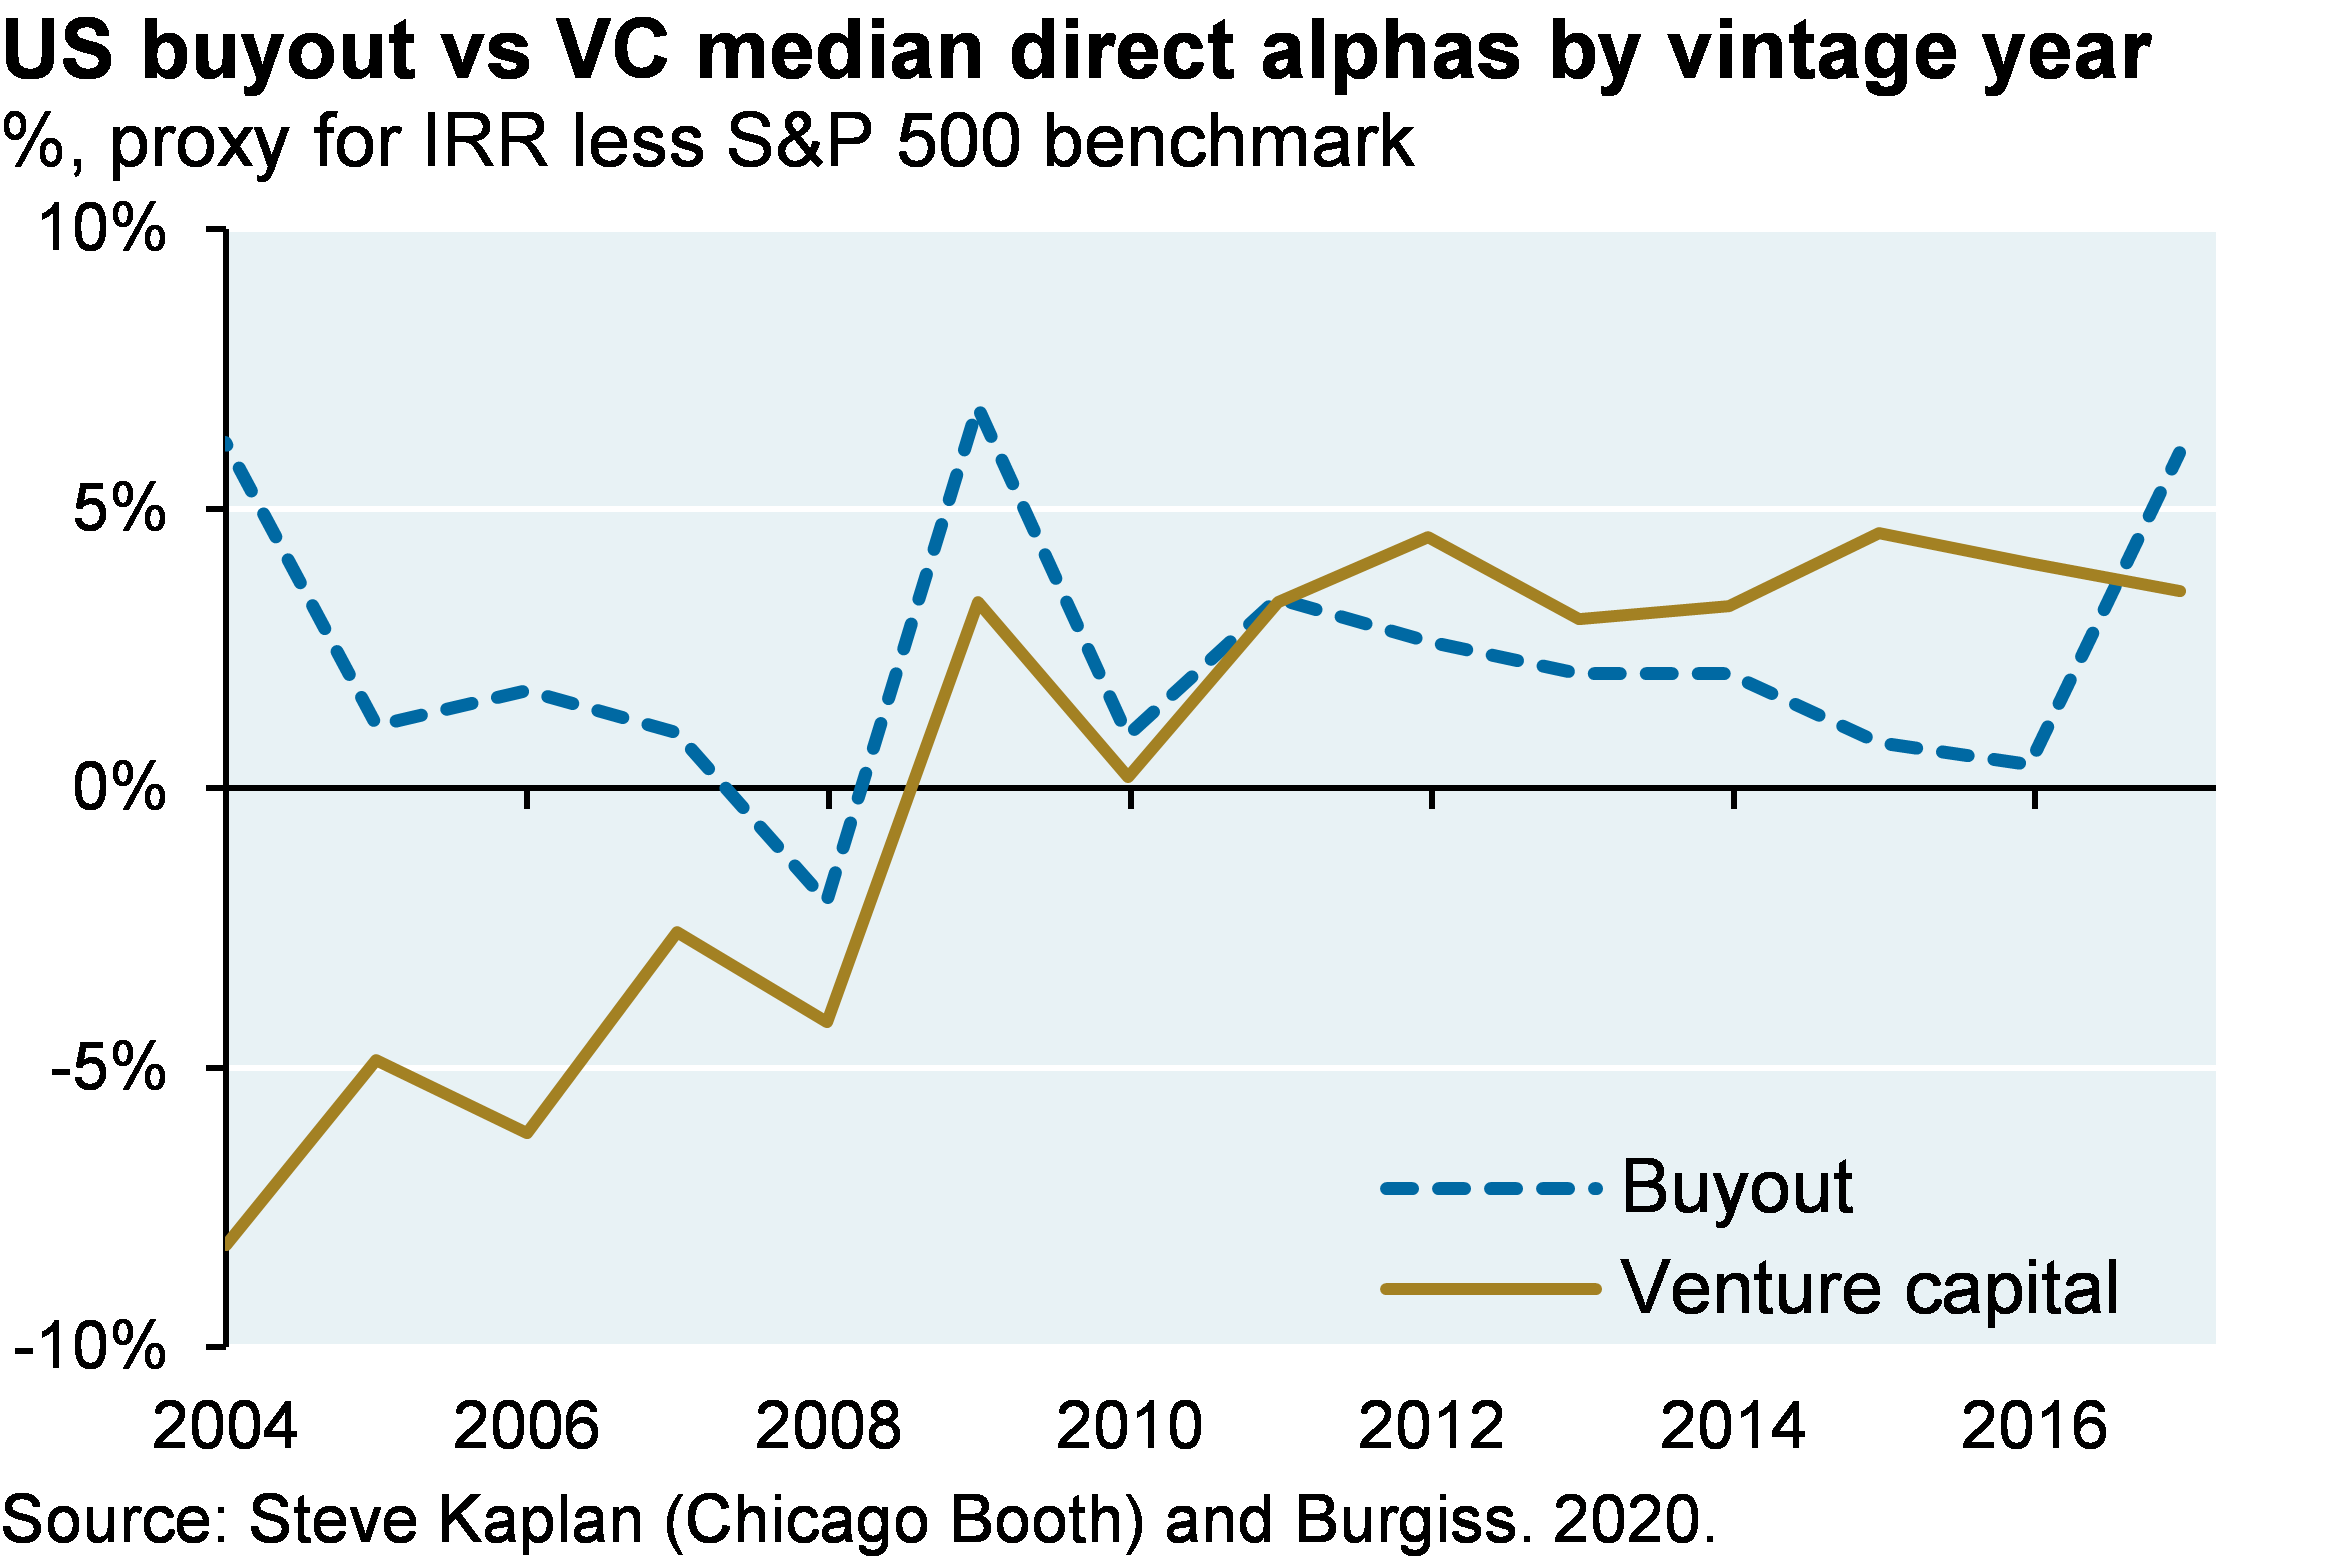 Line chart compares US buyout and VC median direct alpha by vintage year. Venture capital has outperformed buyout since 2010, with the exception of the most recent vintage year shown (2017).